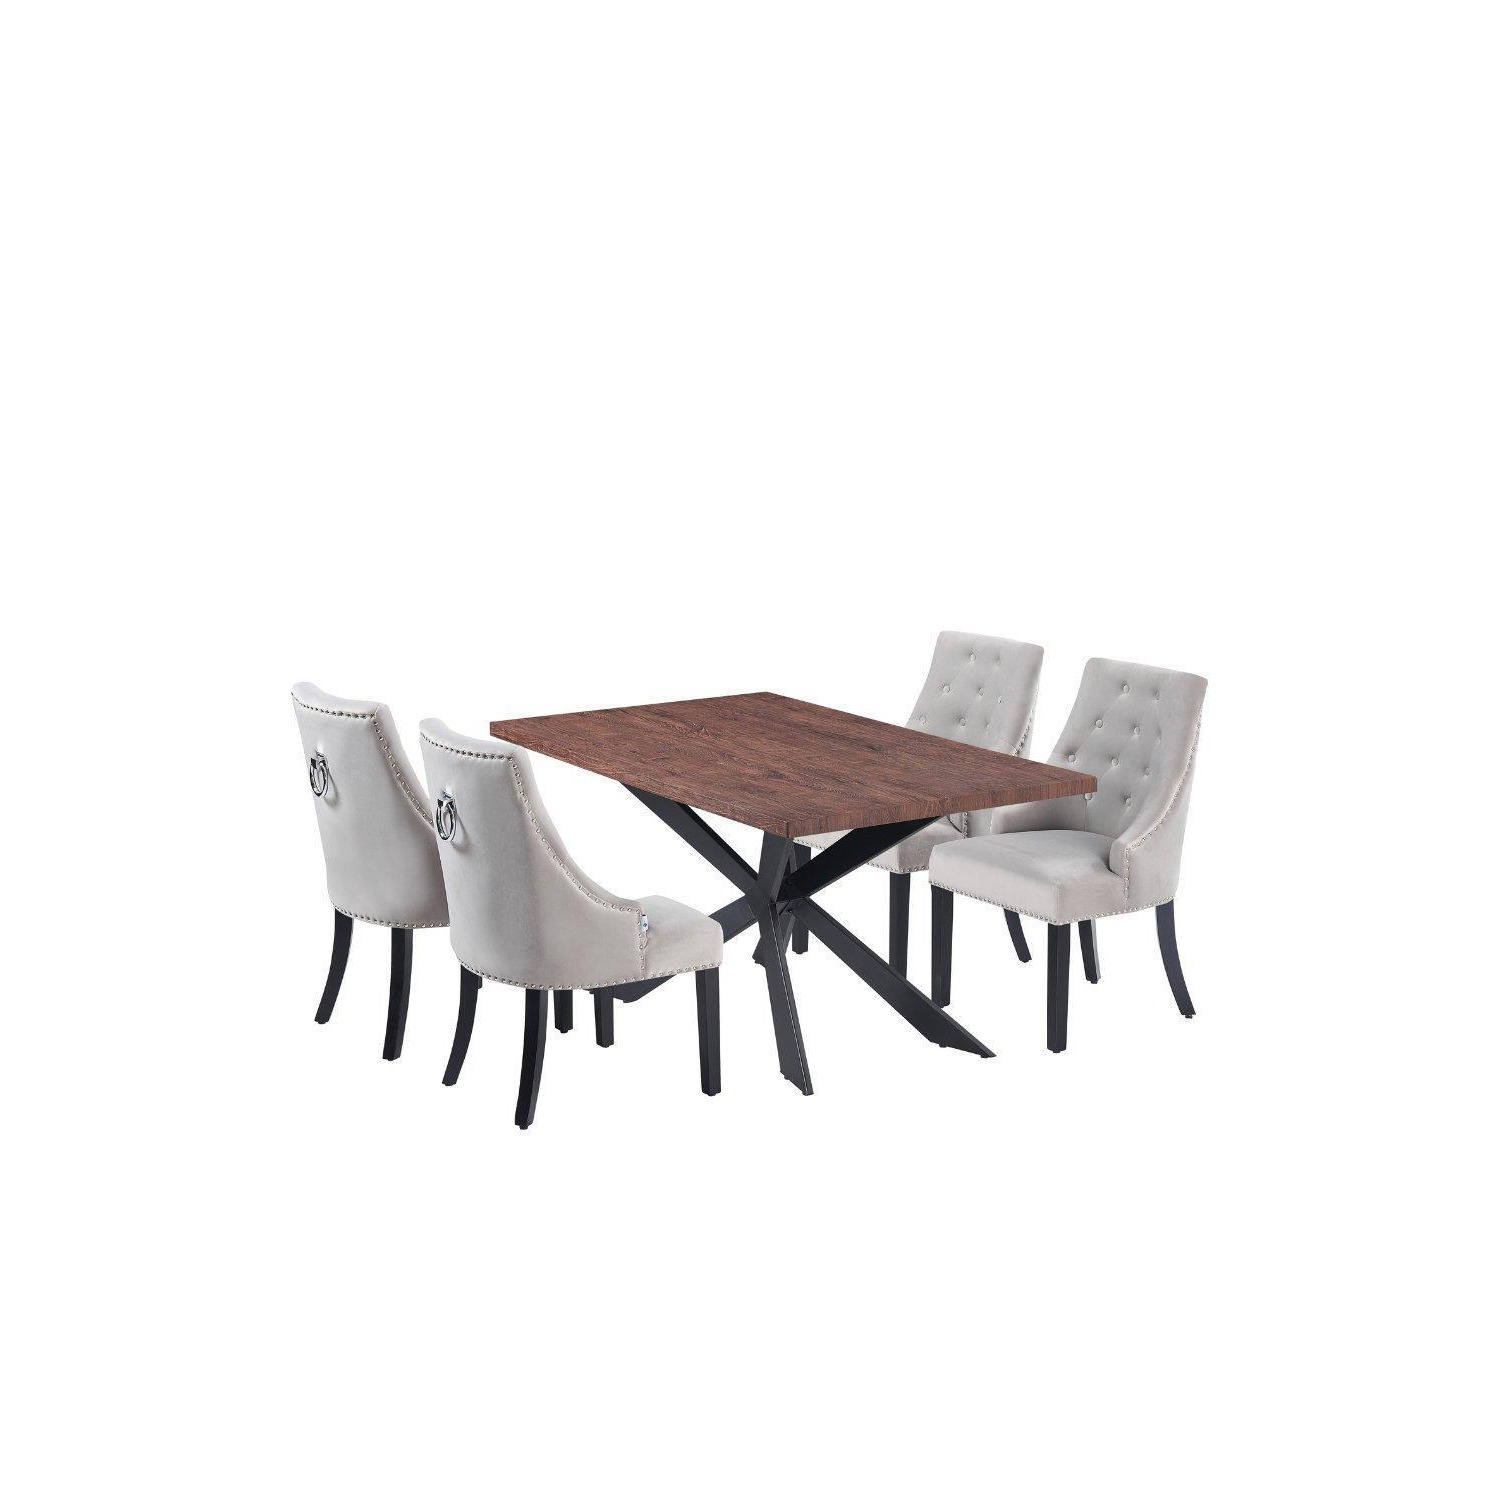 'Windsor Duke' LUX Dining Set a Table and Chairs Set of 4 - image 1